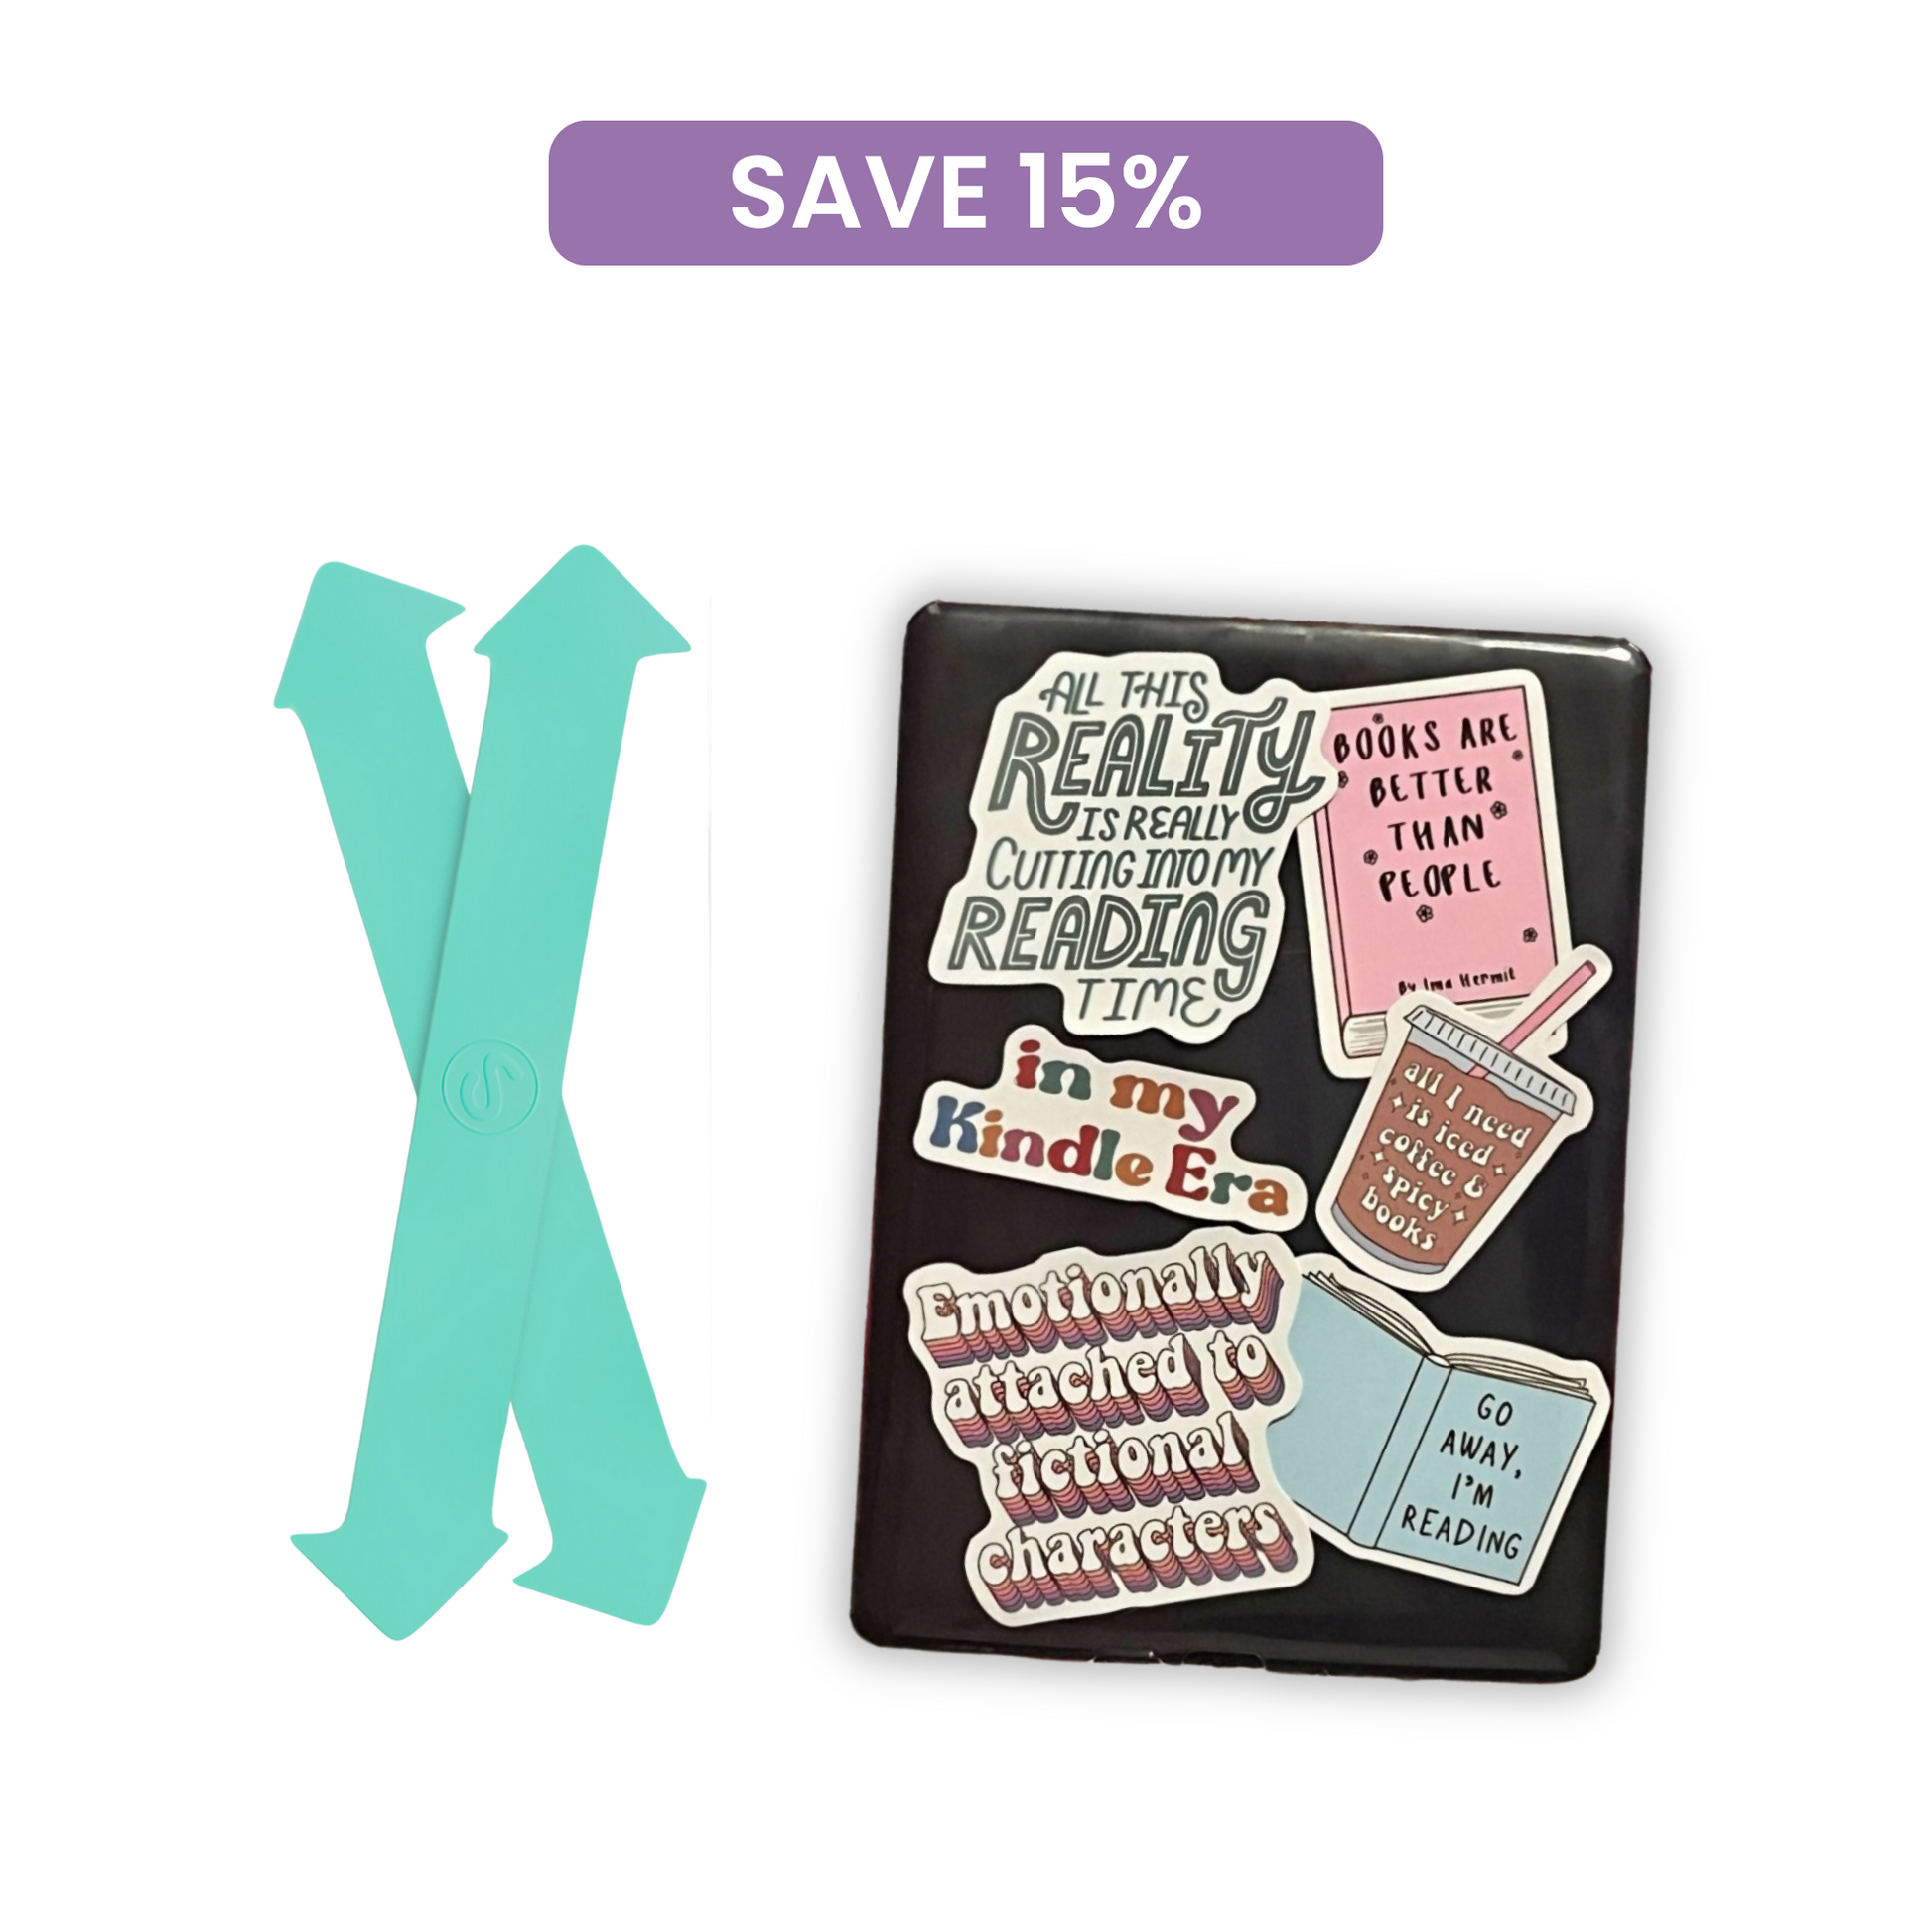 Kindle clear case straps and stickers bundle